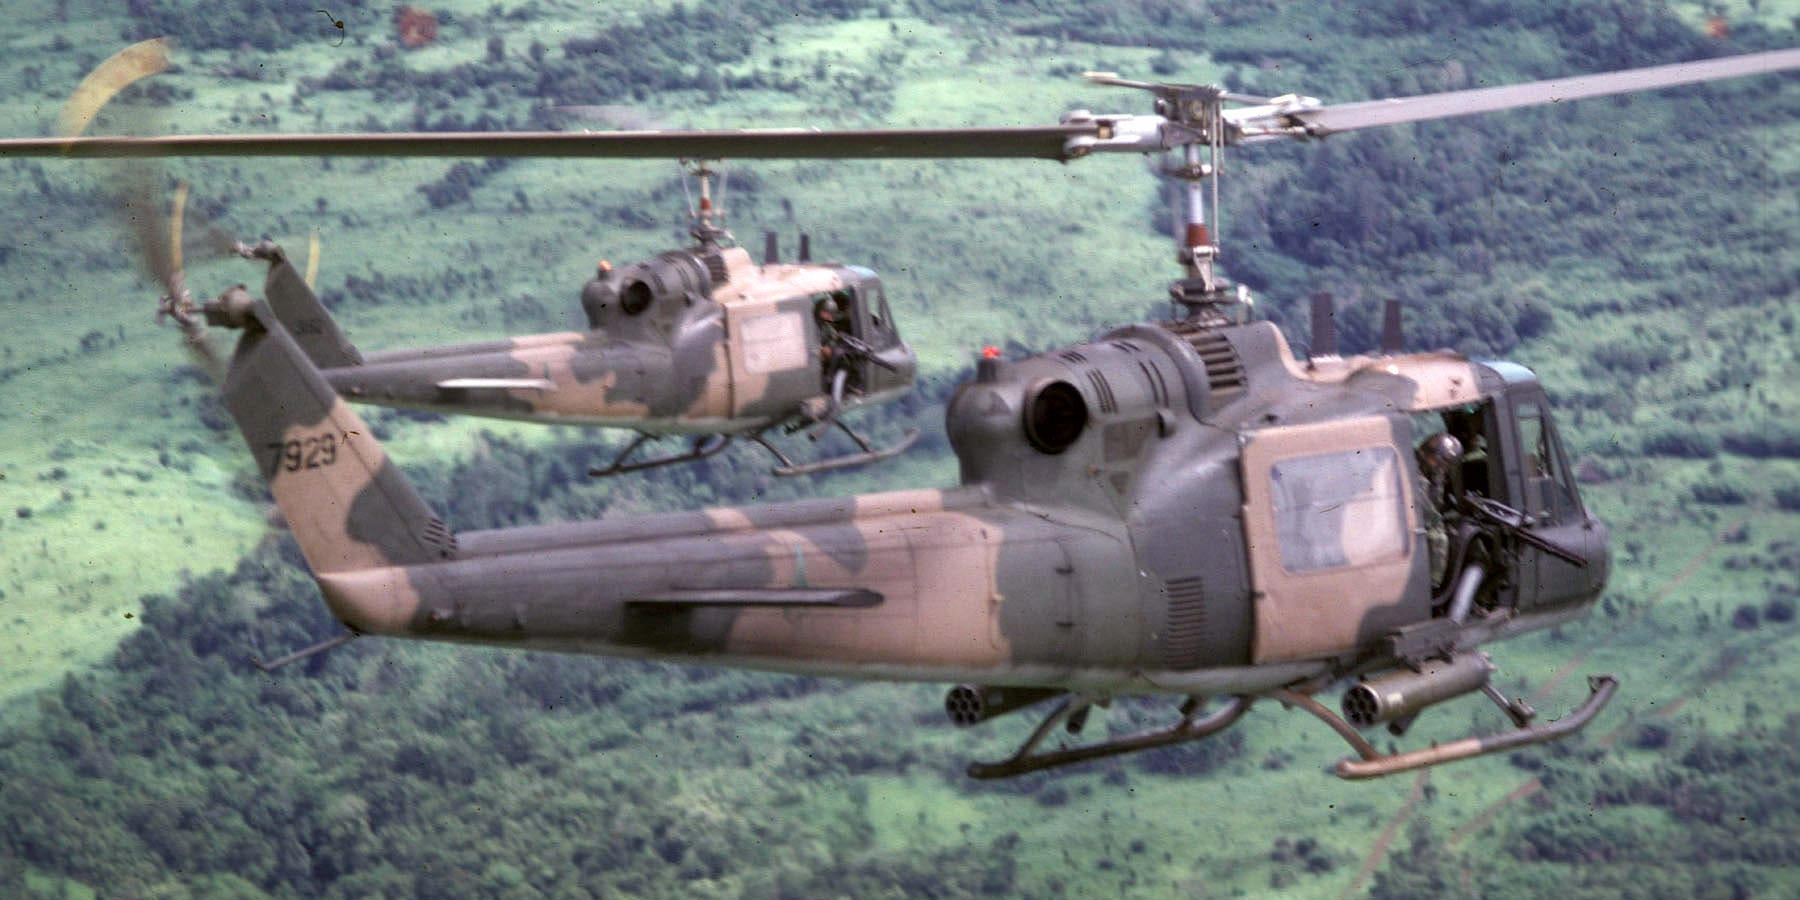 Air Force UH-1P Huey helicopter Cambodia